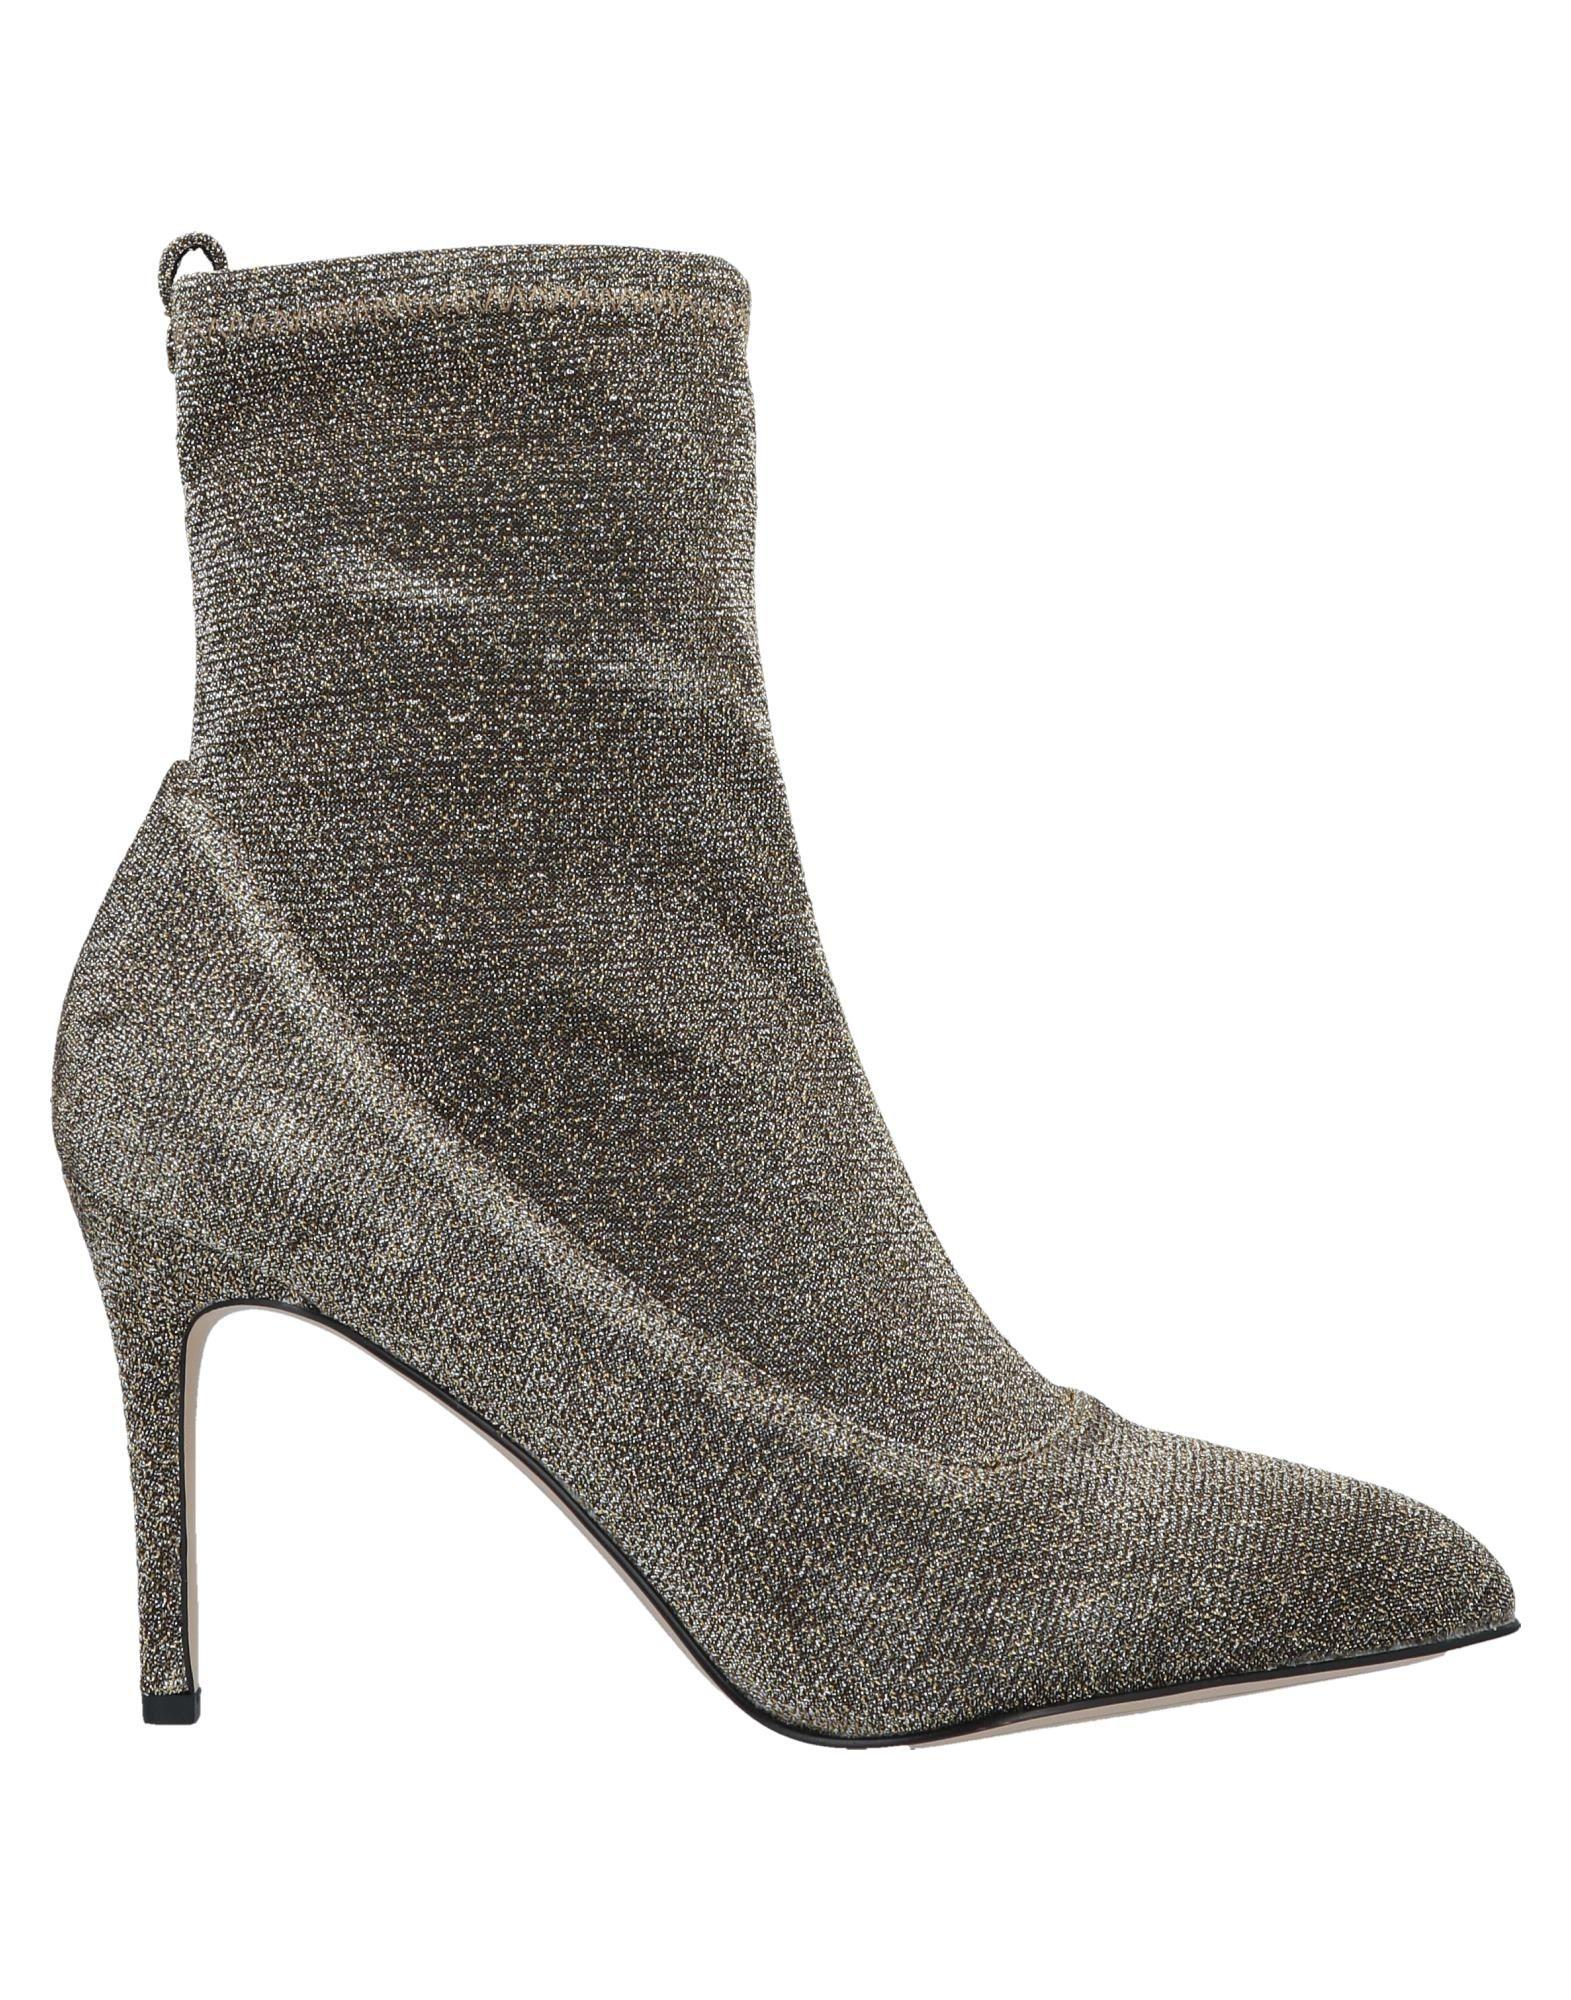 Sam Edelman Ankle Boots in Sand (Gray) - Lyst